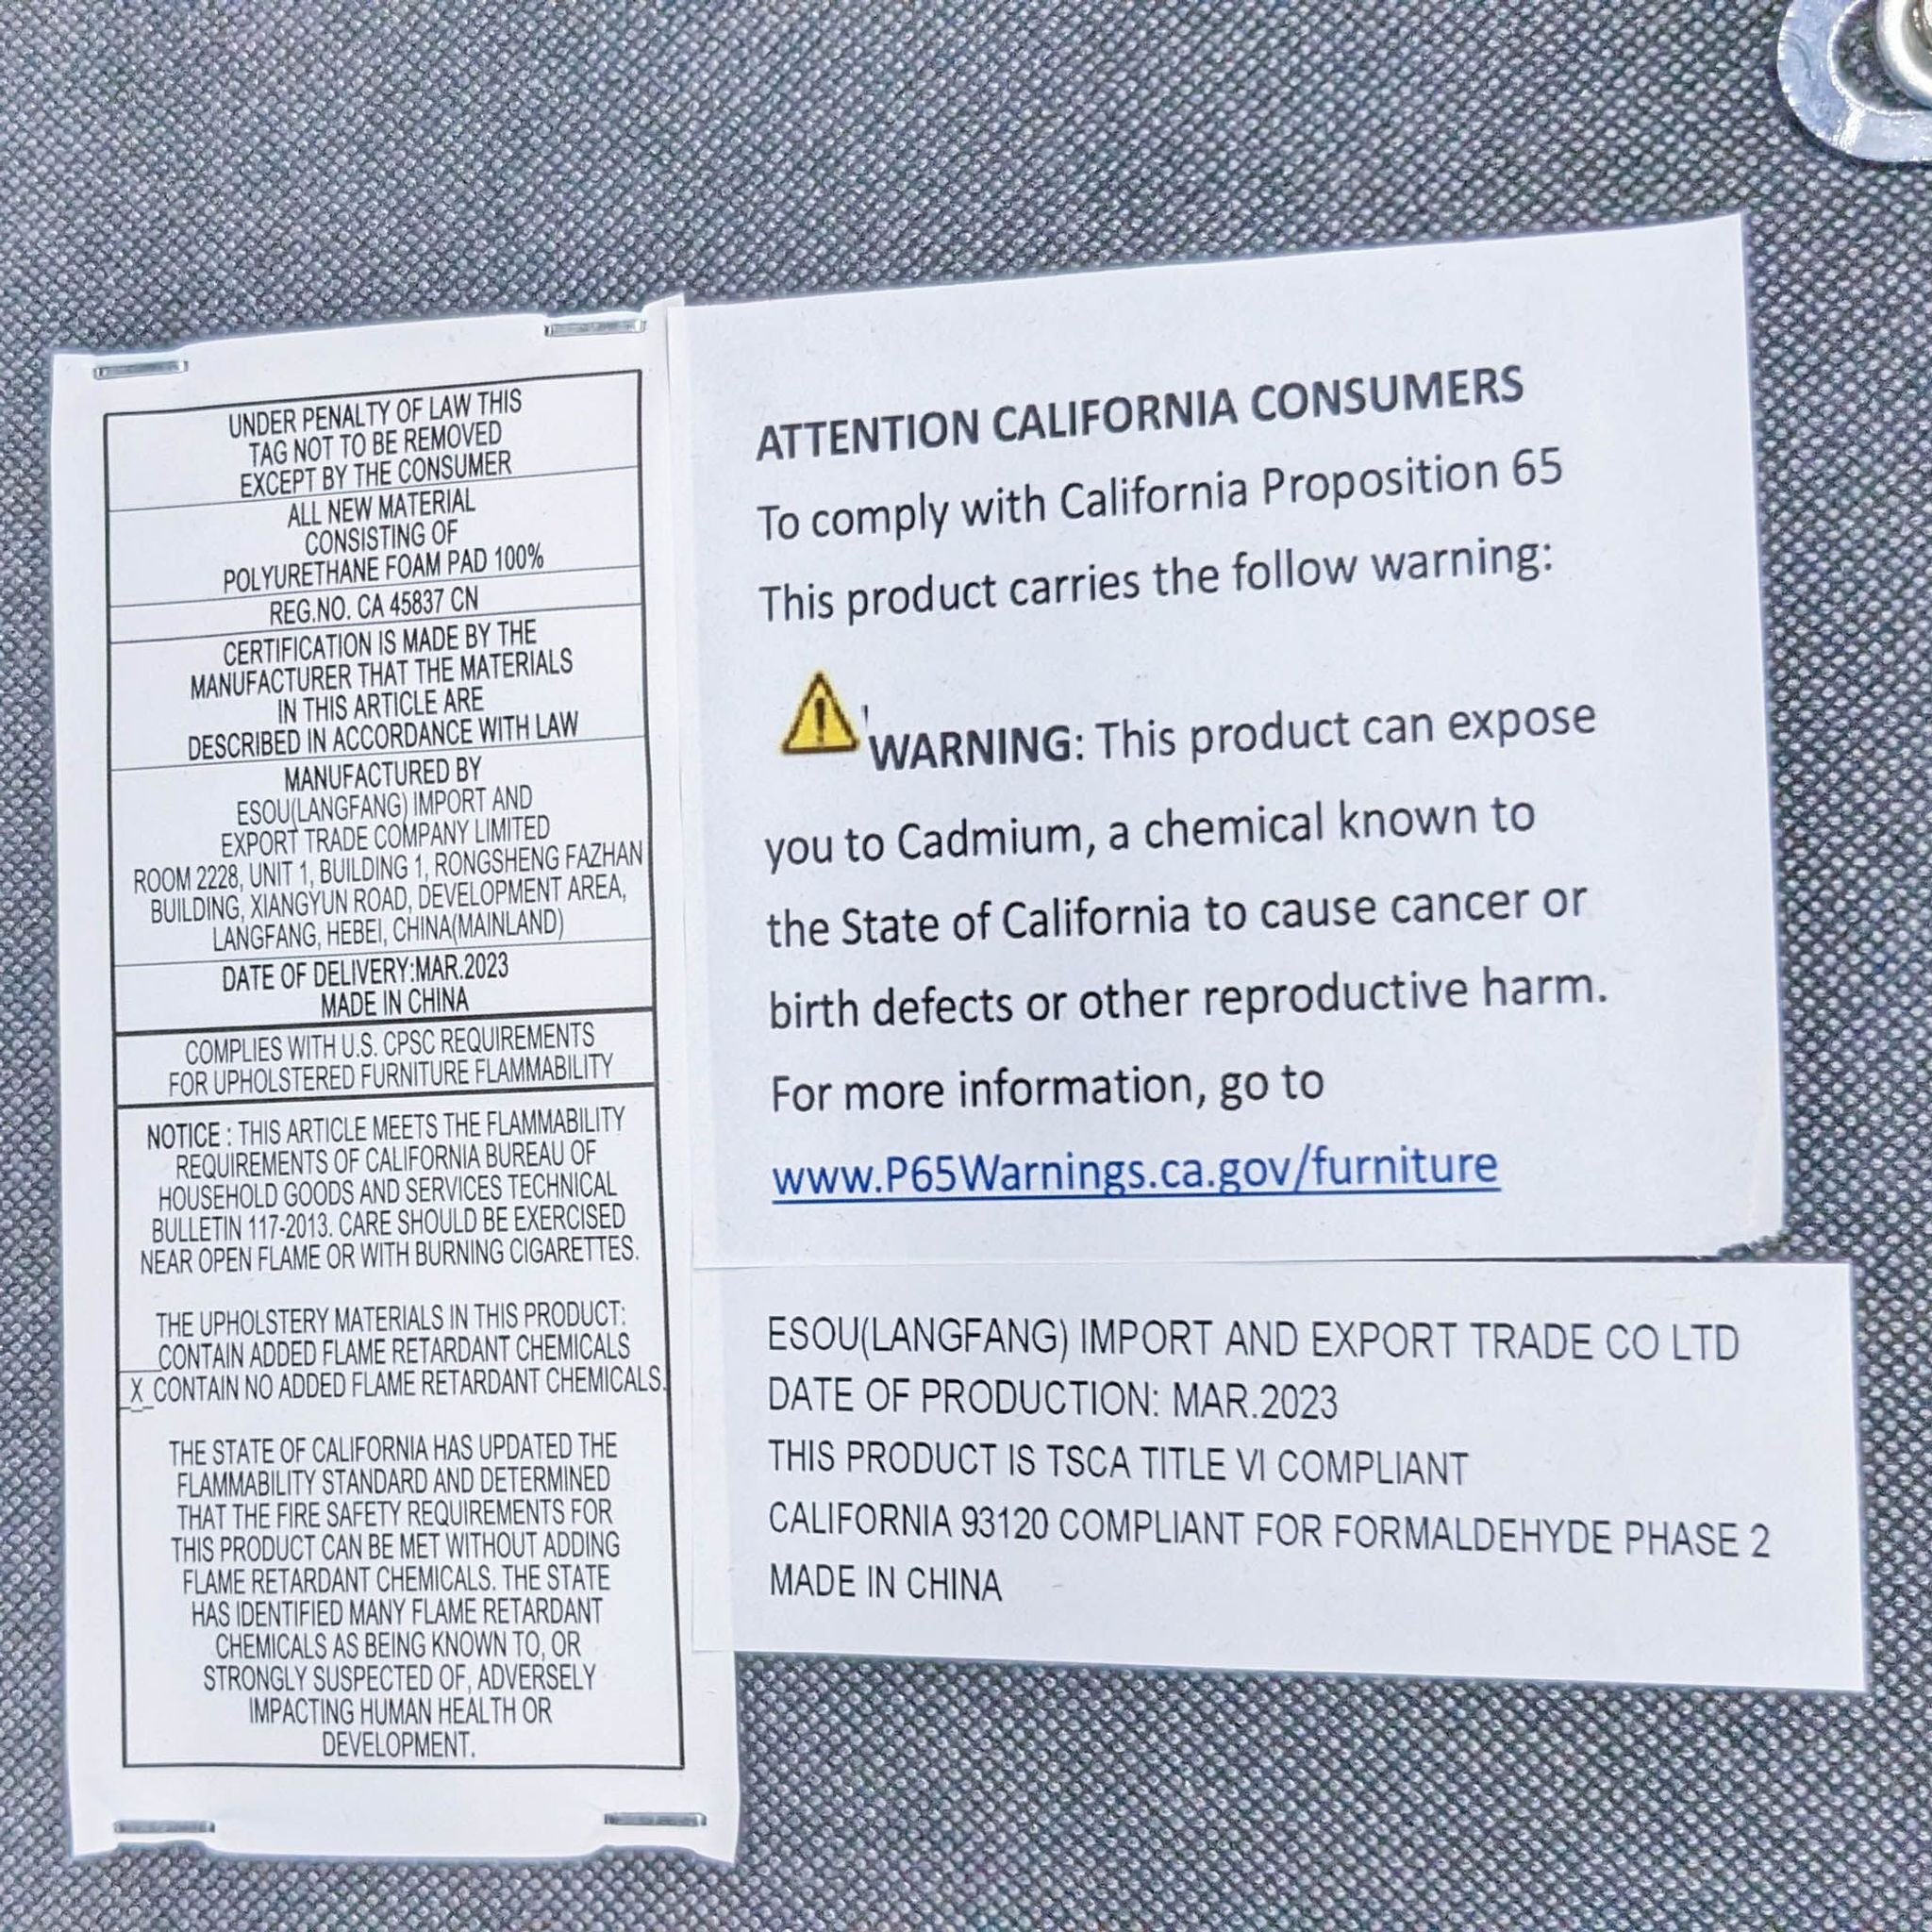 Close-up of a California Proposition 65 warning label on furniture indicating potential exposure to harmful chemicals.